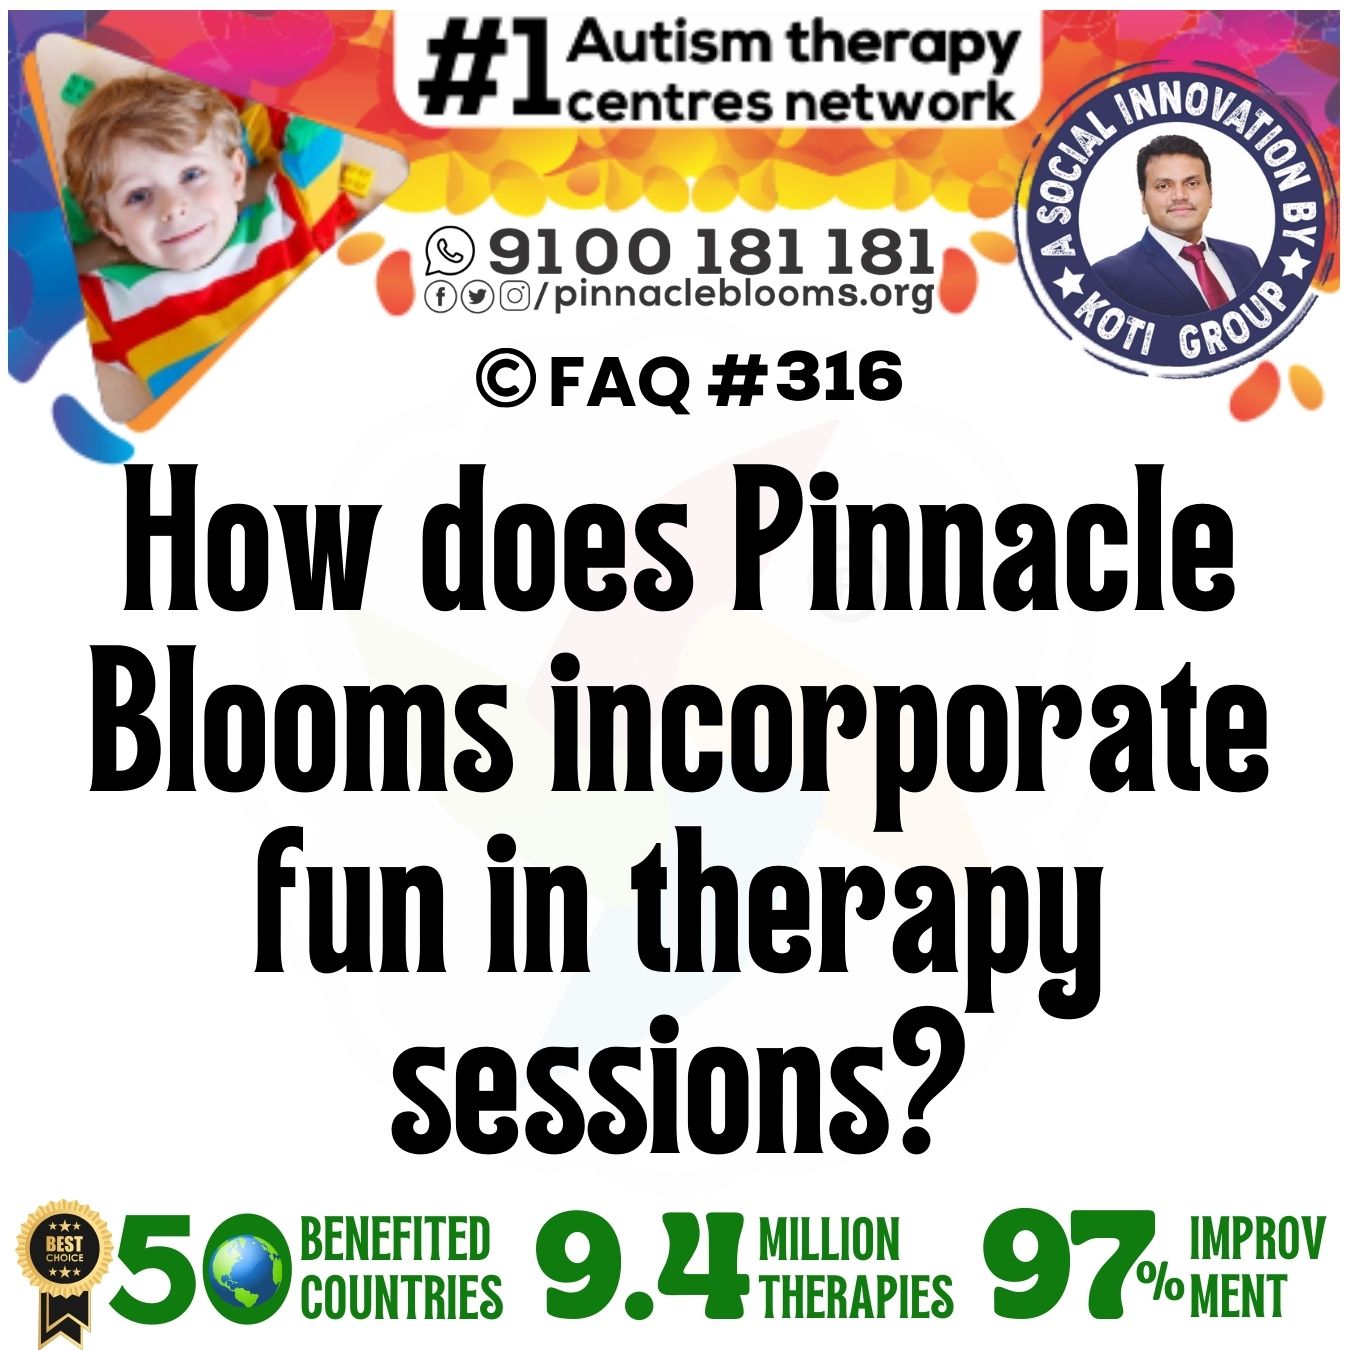 How does Pinnacle Blooms incorporate fun in therapy sessions?